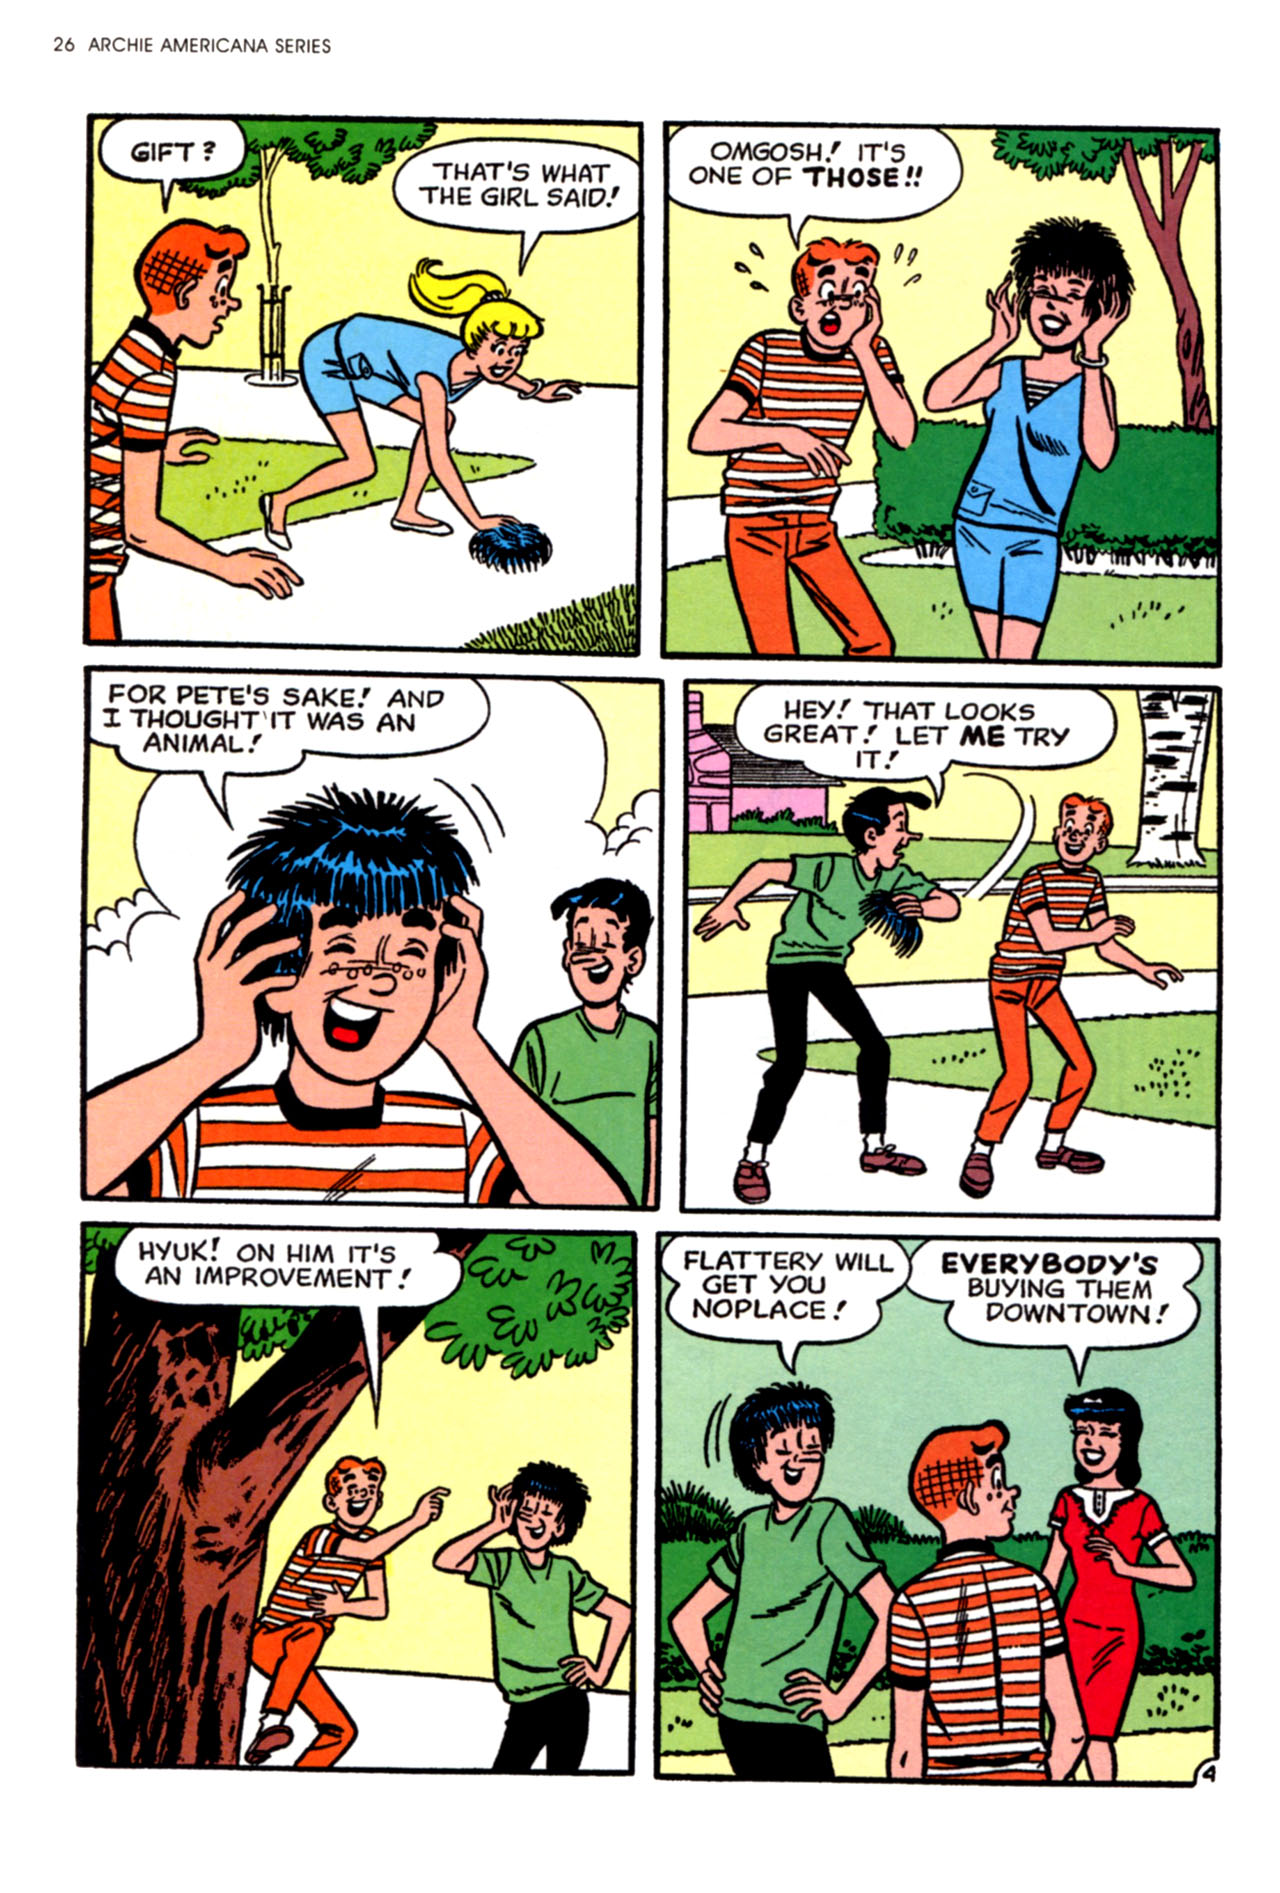 Read online Archie Americana Series comic -  Issue # TPB 3 - 28